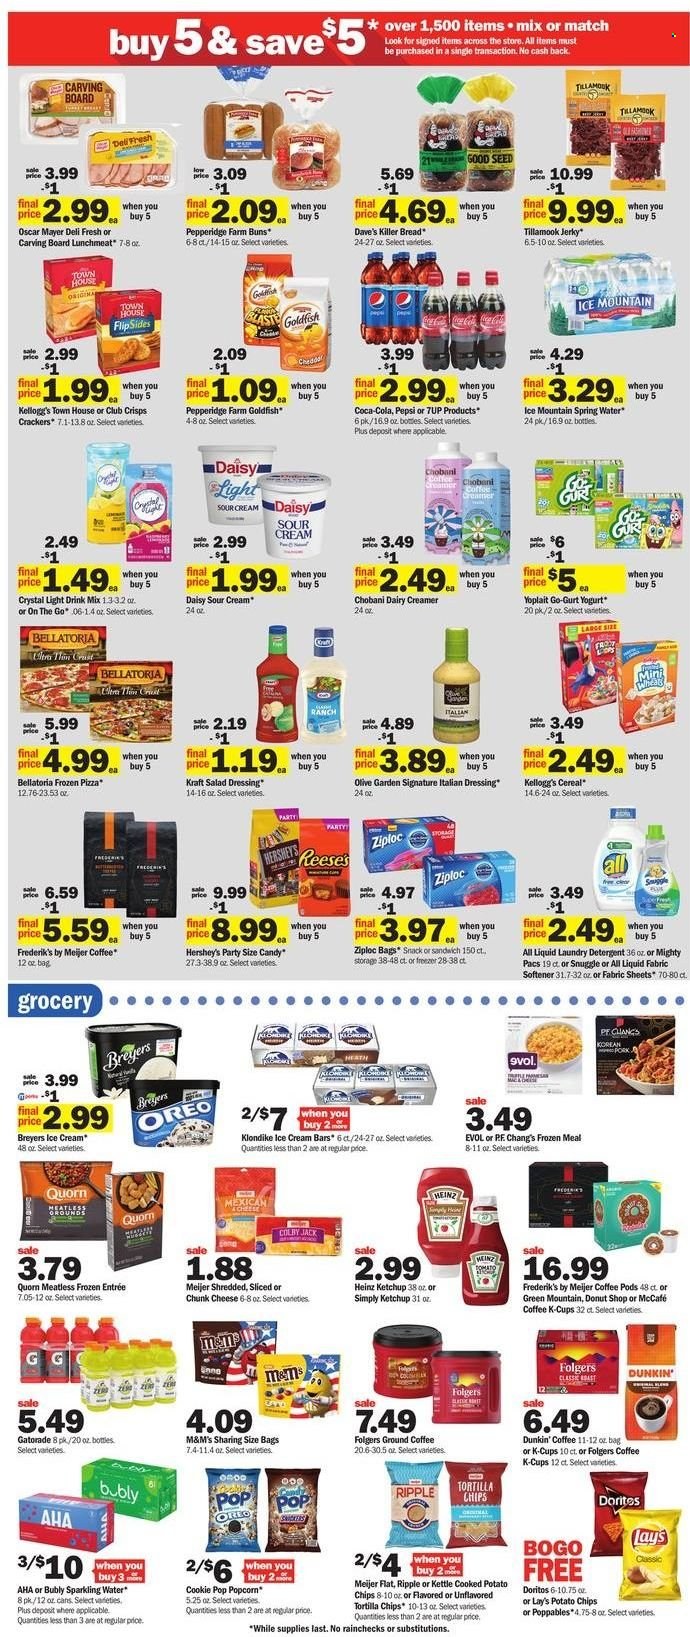 thumbnail - Meijer Flyer - 05/22/2022 - 05/28/2022 - Sales products - bread, buns, pizza, sandwich, Kraft®, jerky, Oscar Mayer, lunch meat, Colby cheese, chunk cheese, Oreo, yoghurt, Yoplait, Chobani, sour cream, creamer, italian dressing, ice cream, ice cream bars, Reese's, Hershey's, Bellatoria, snack, M&M's, crackers, Kellogg's, Doritos, tortilla chips, potato chips, Lay’s, popcorn, Goldfish, Heinz, cereals, salad dressing, ketchup, dressing, Coca-Cola, Pepsi, 7UP, Gatorade, spring water, sparkling water, Ice Mountain, coffee pods, Folgers, ground coffee, coffee capsules, McCafe, K-Cups, Green Mountain, detergent, Snuggle, fabric softener, laundry detergent, Ziploc, Jays. Page 3.